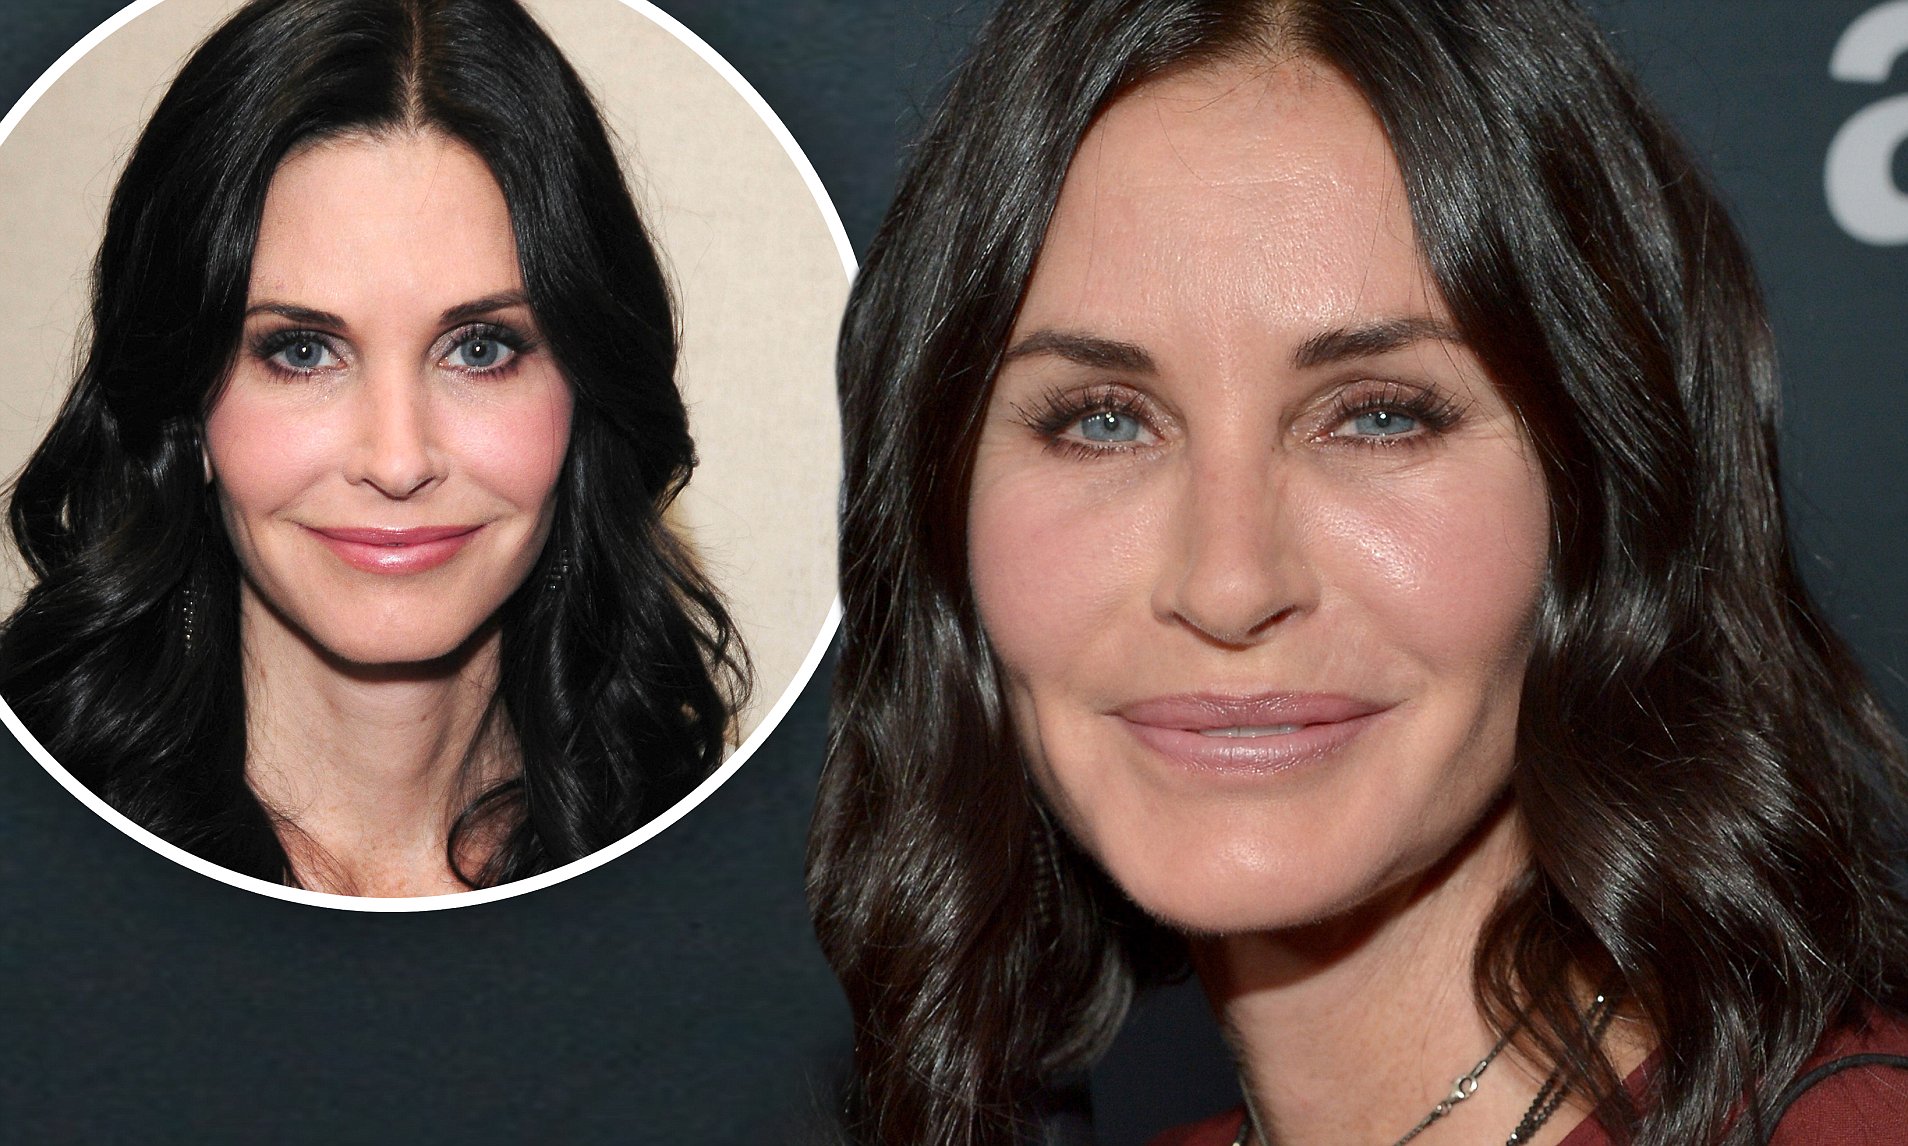 "It became crazy": Courteney Cox admitted to a dangerous addictio...